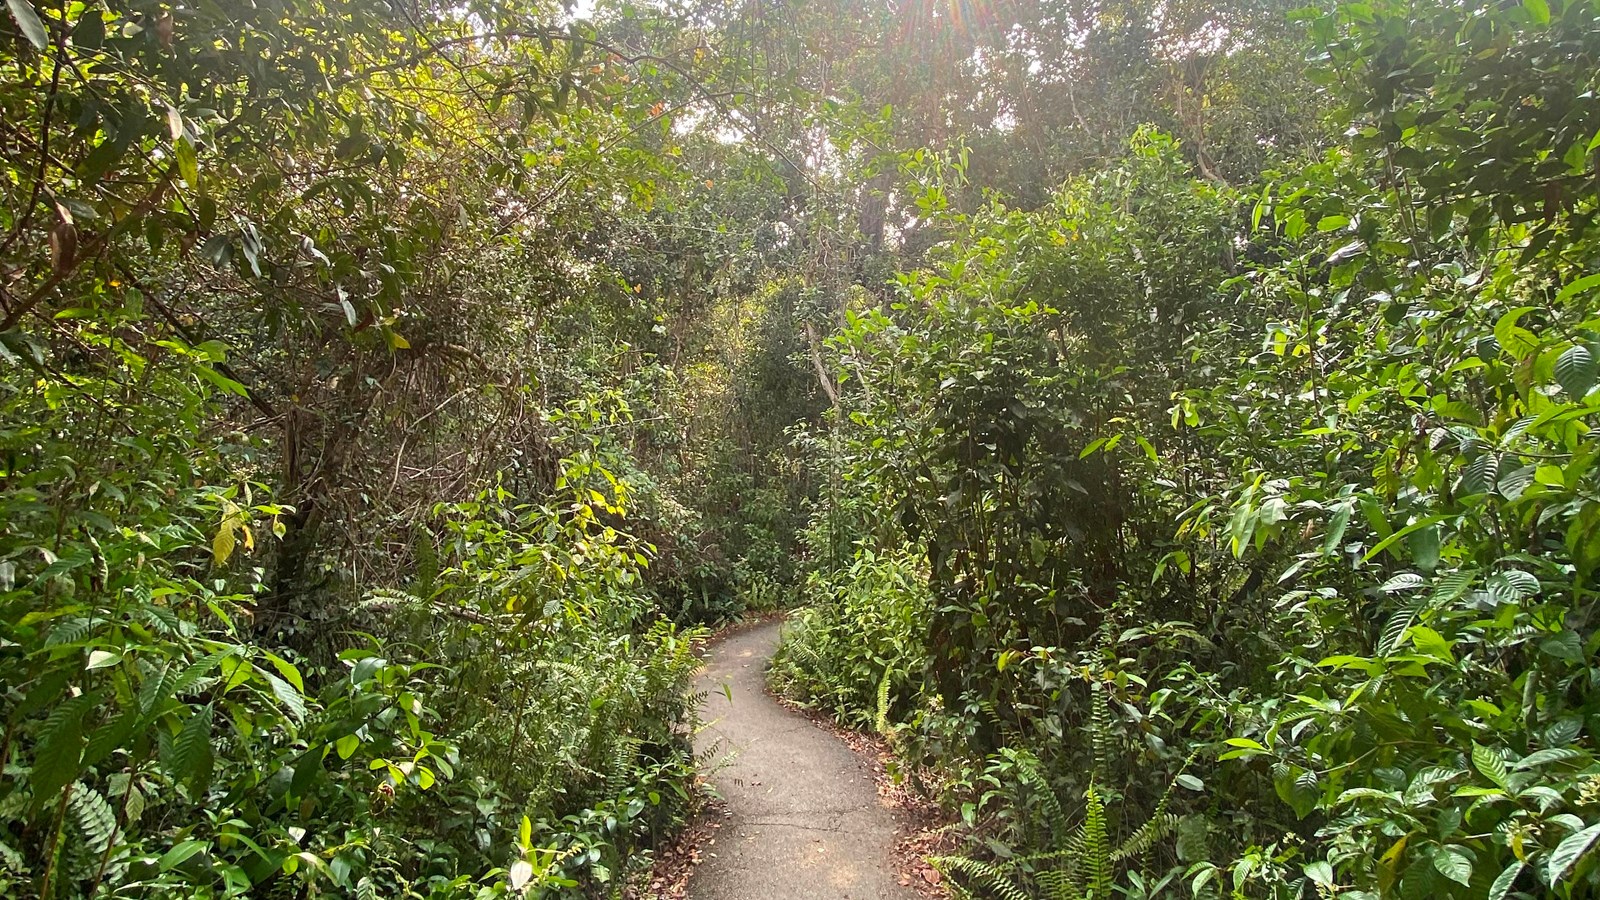 A paved path meanders through dense green vegetation with overhanging, leafy branches